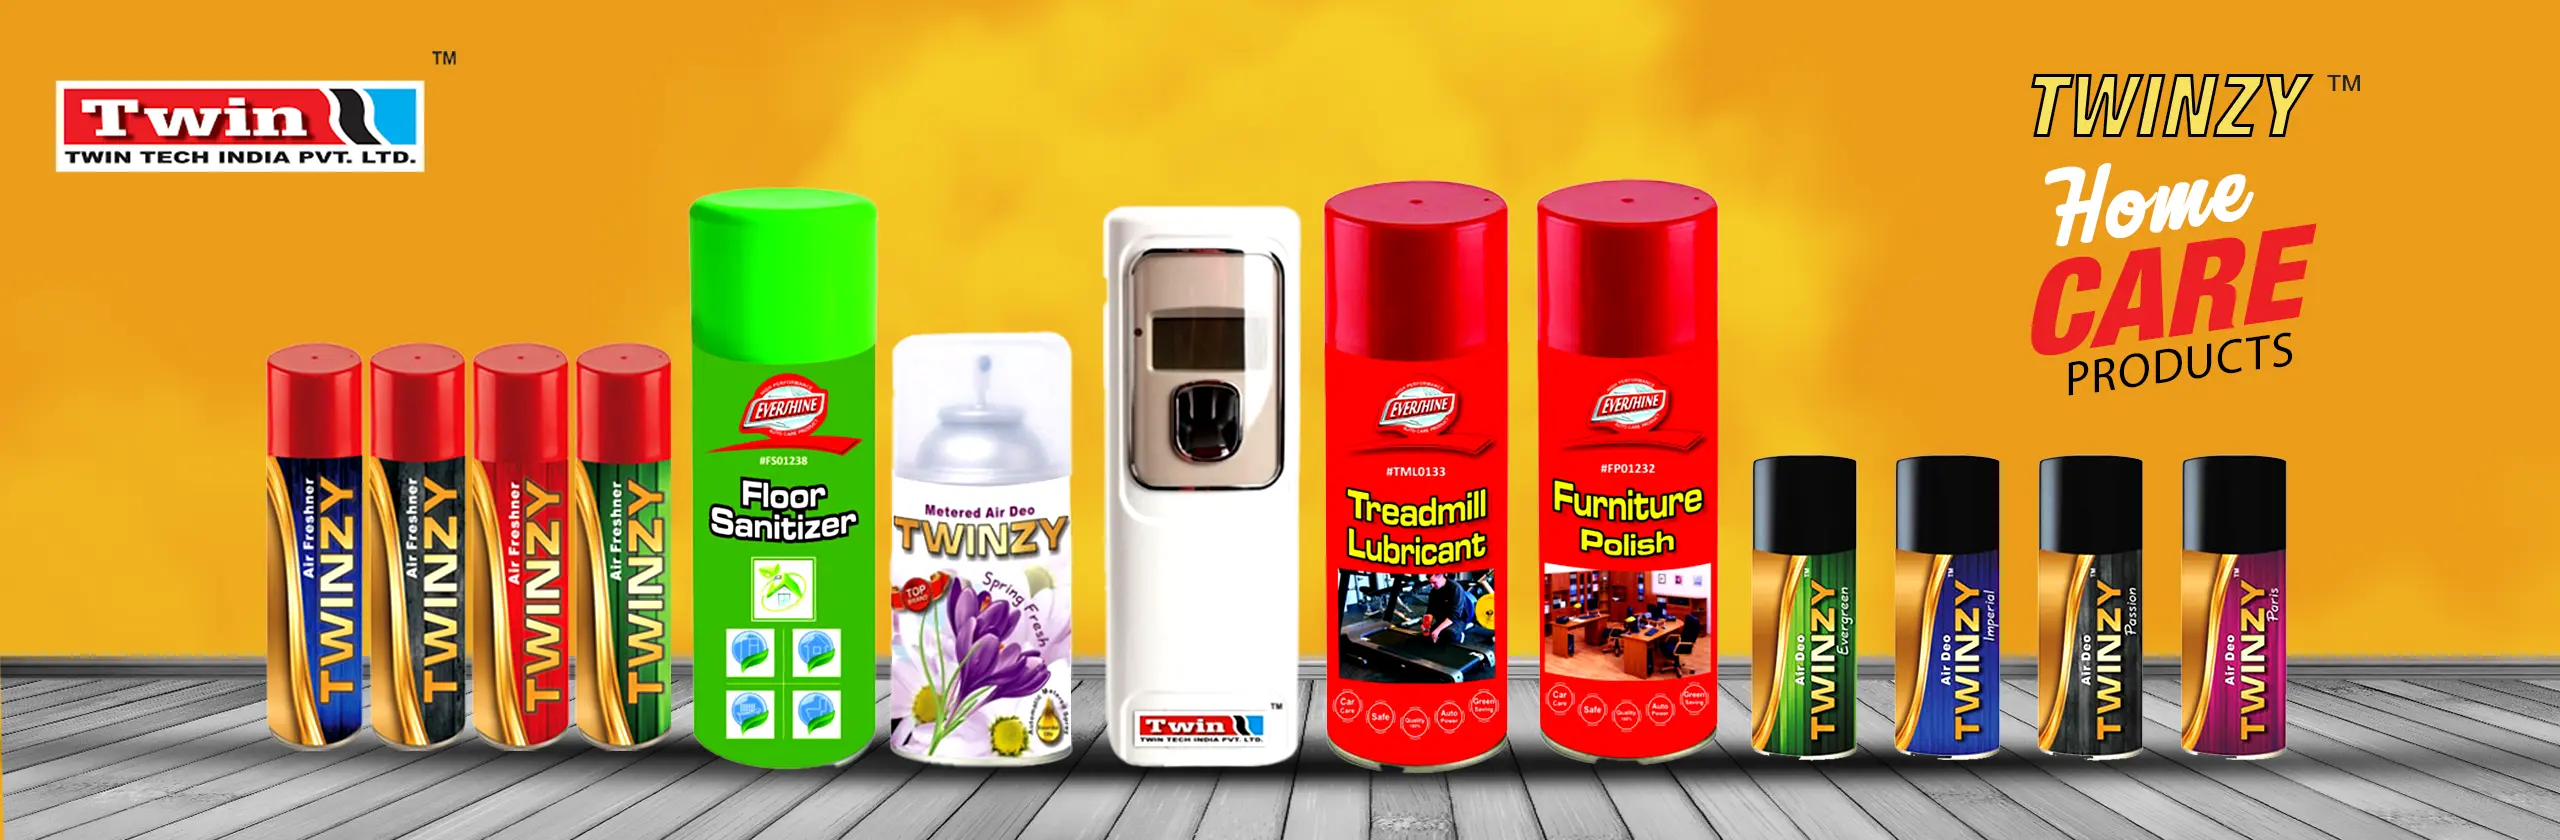 Home Care Products Manufacturer/Brand/Company in India